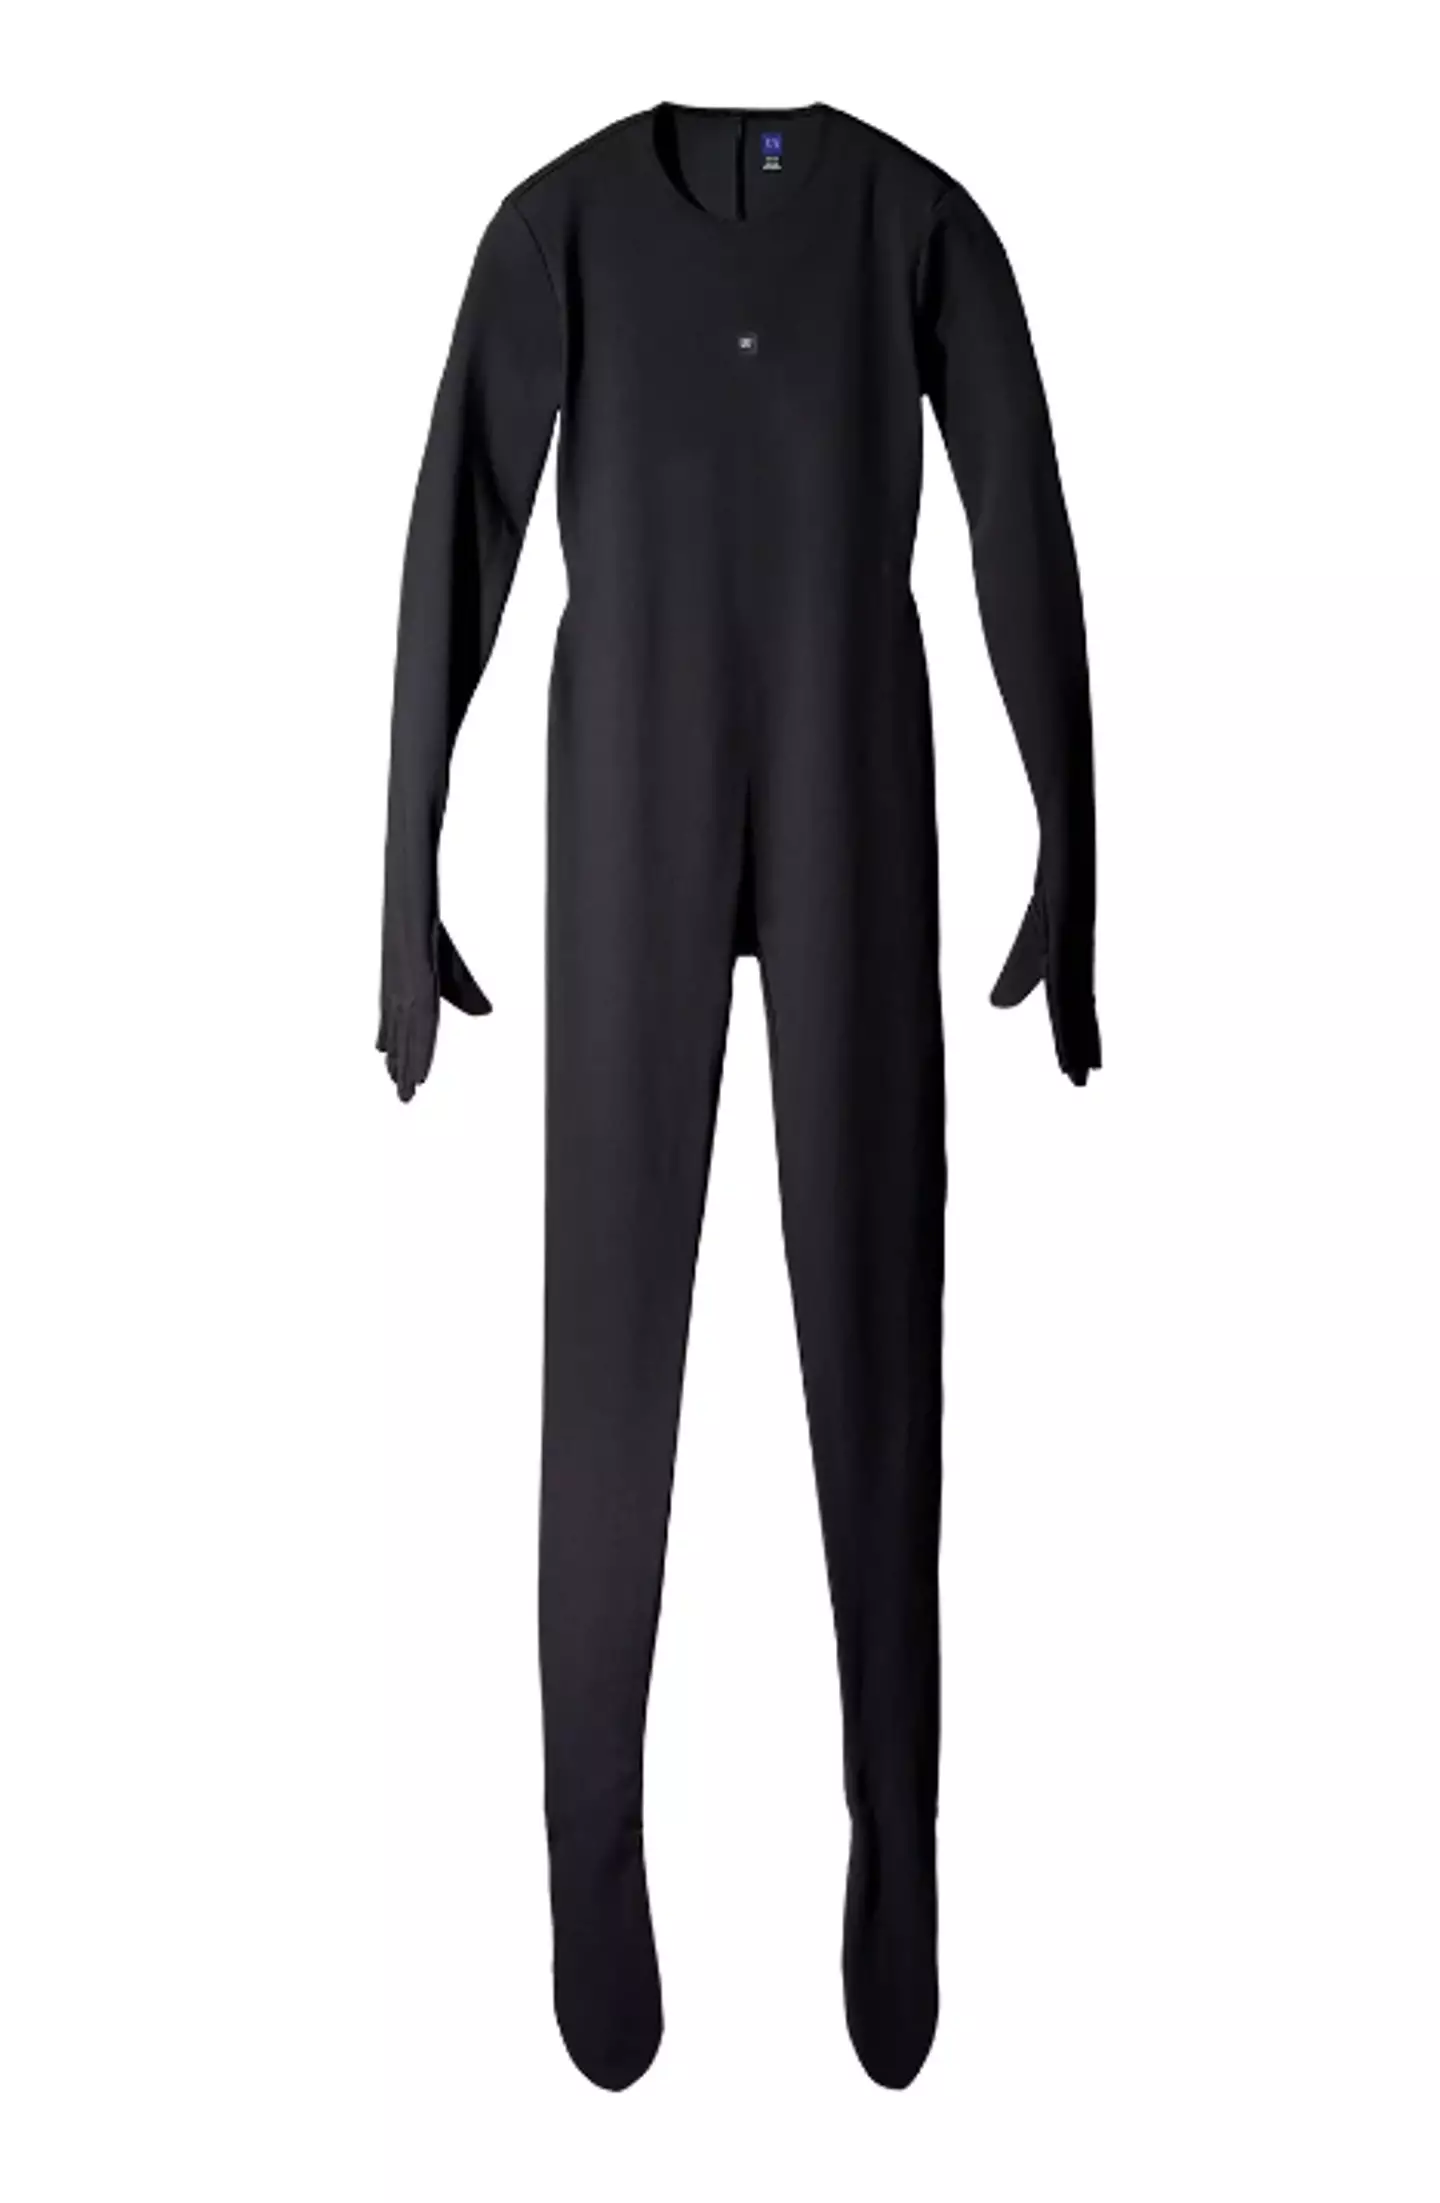 For just $300 you too can buy Kanye's collection and look like Slender Man.